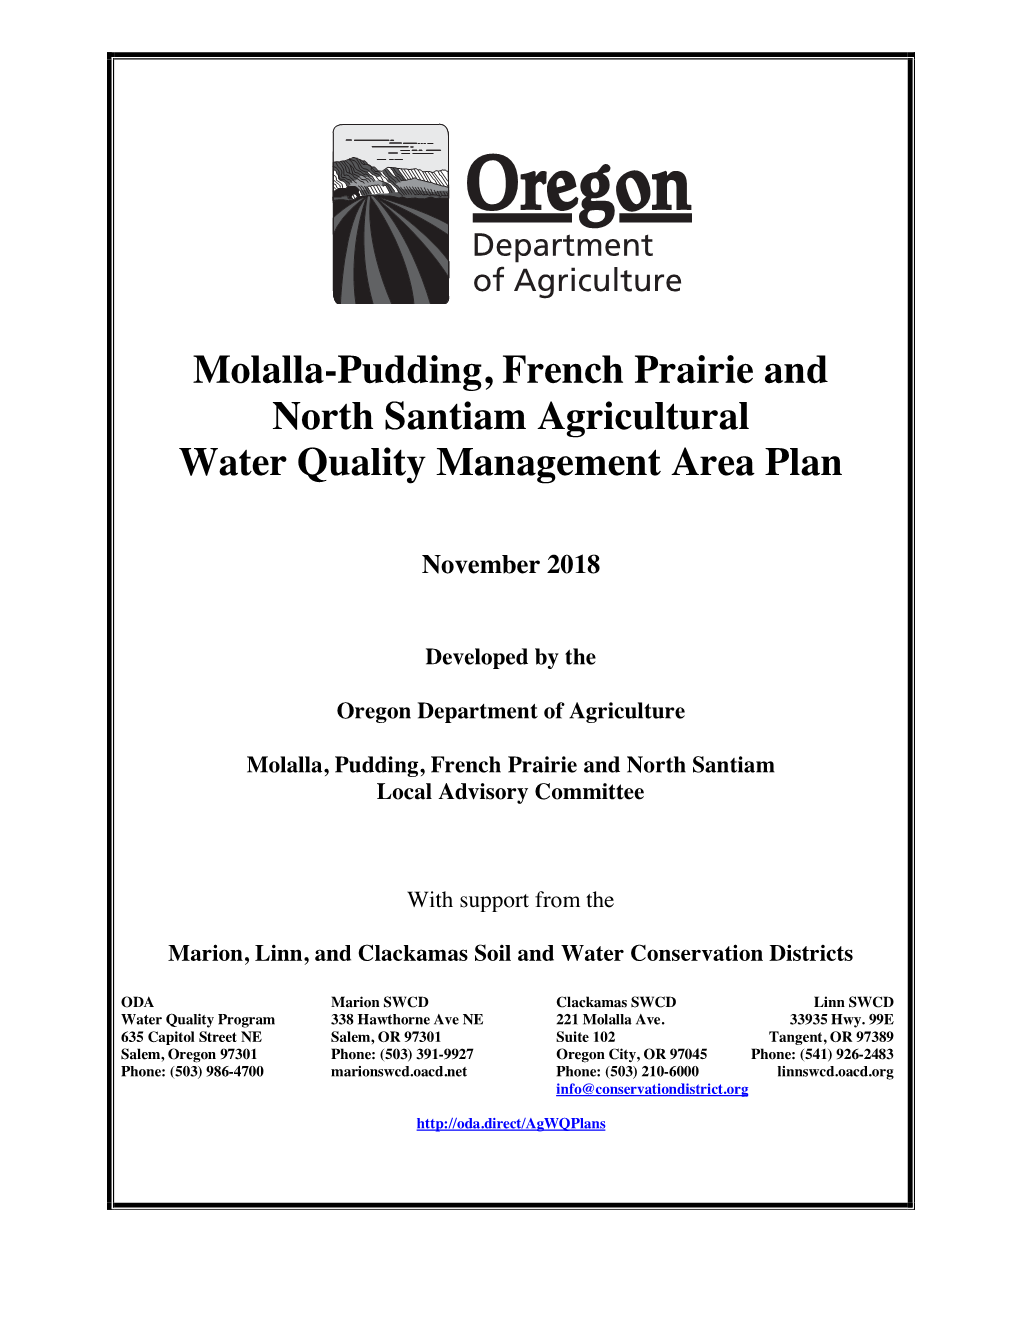 Molalla-Pudding, French Prairie and North Santiam Agricultural Water Quality Management Area Plan